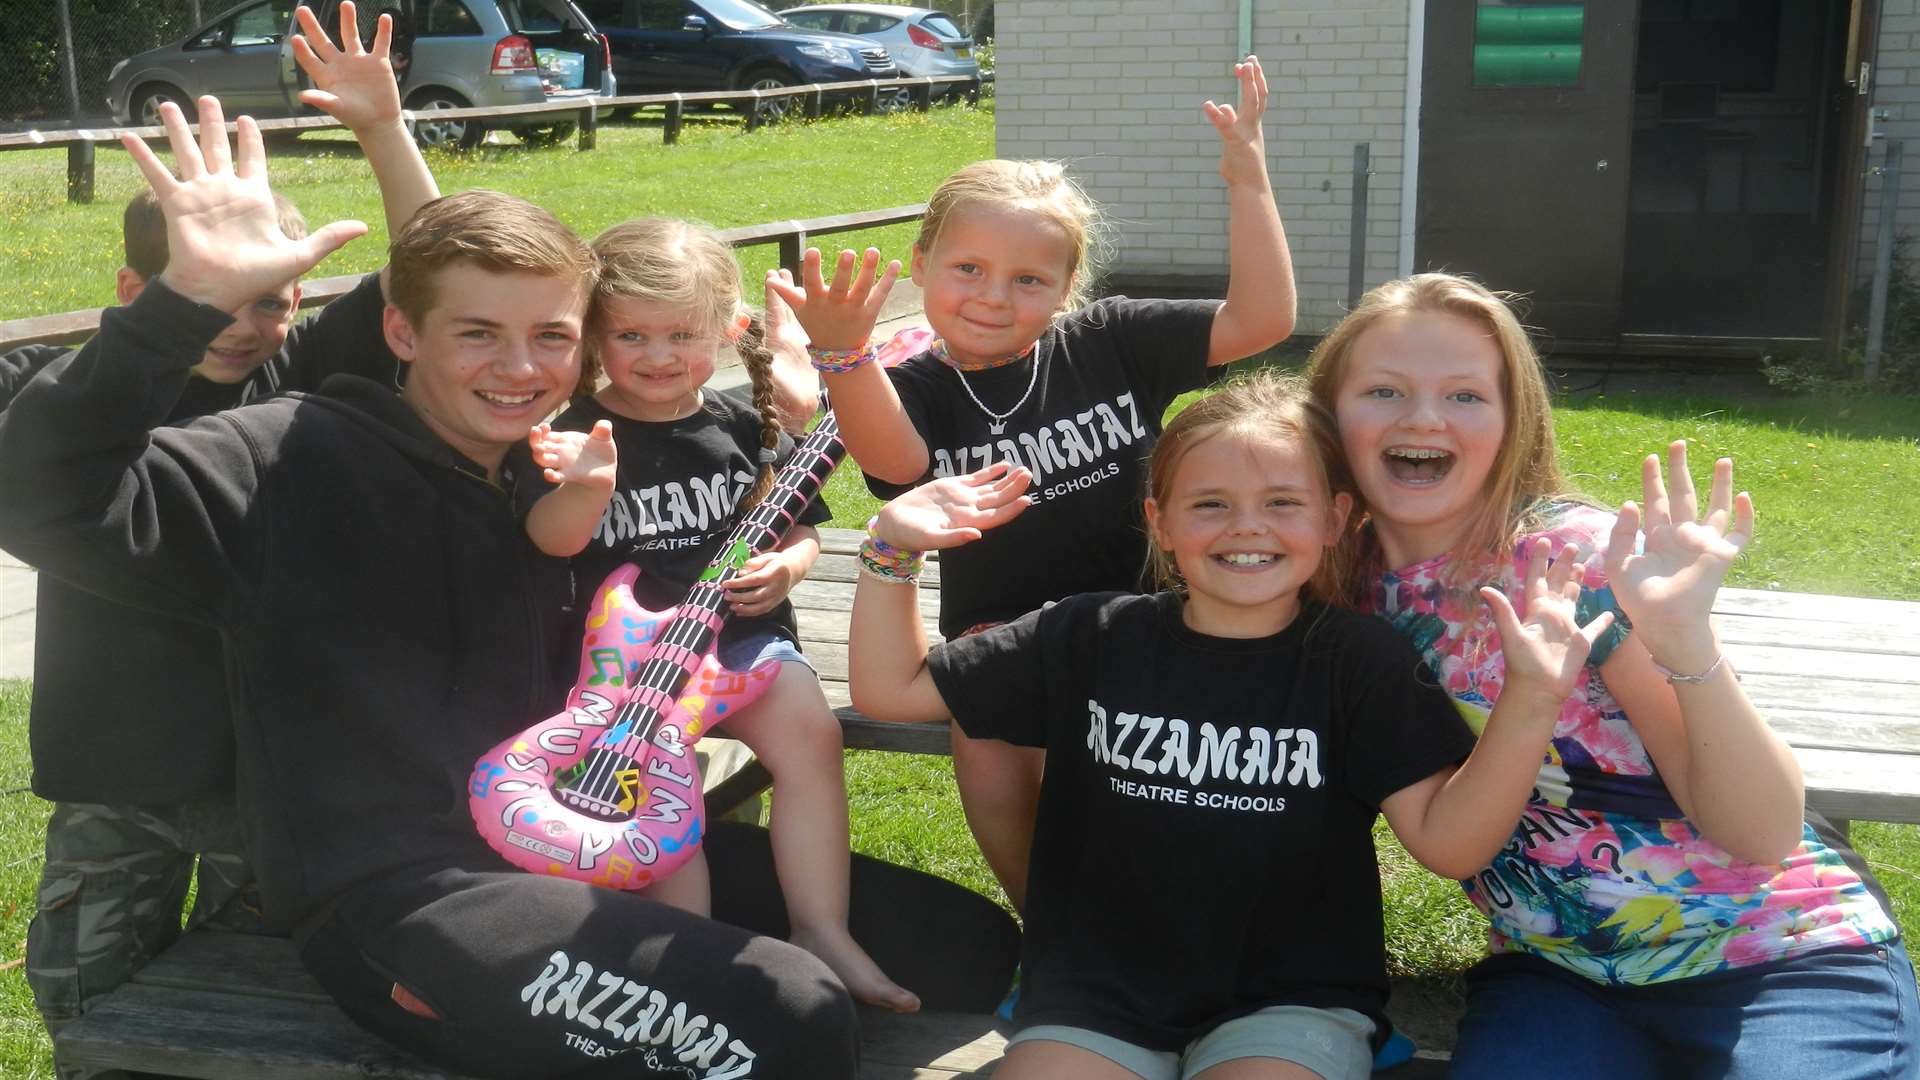 Students from Razzamataz Theatre School were welcomed to a KMFM street party